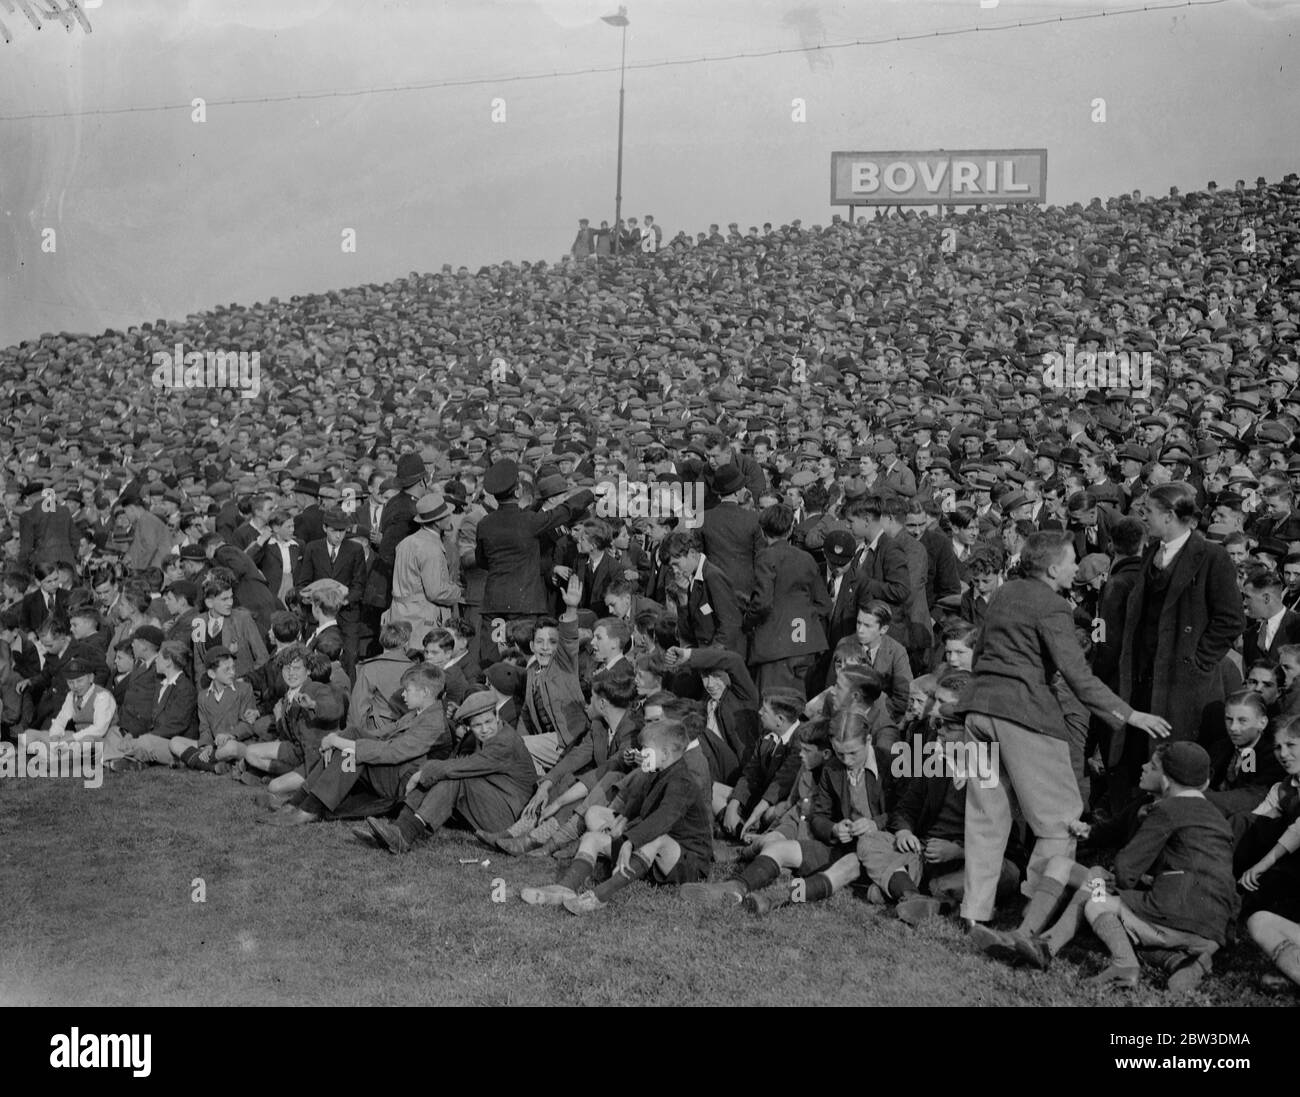 Crowd breaks through barriers at Chelsea - Arsenal  Derby  . A vast crowd of 70,000 people watched the London football  Derby  between Chelsea and Arsenal at Stamford Bridge . 12 October 1935 Stock Photo